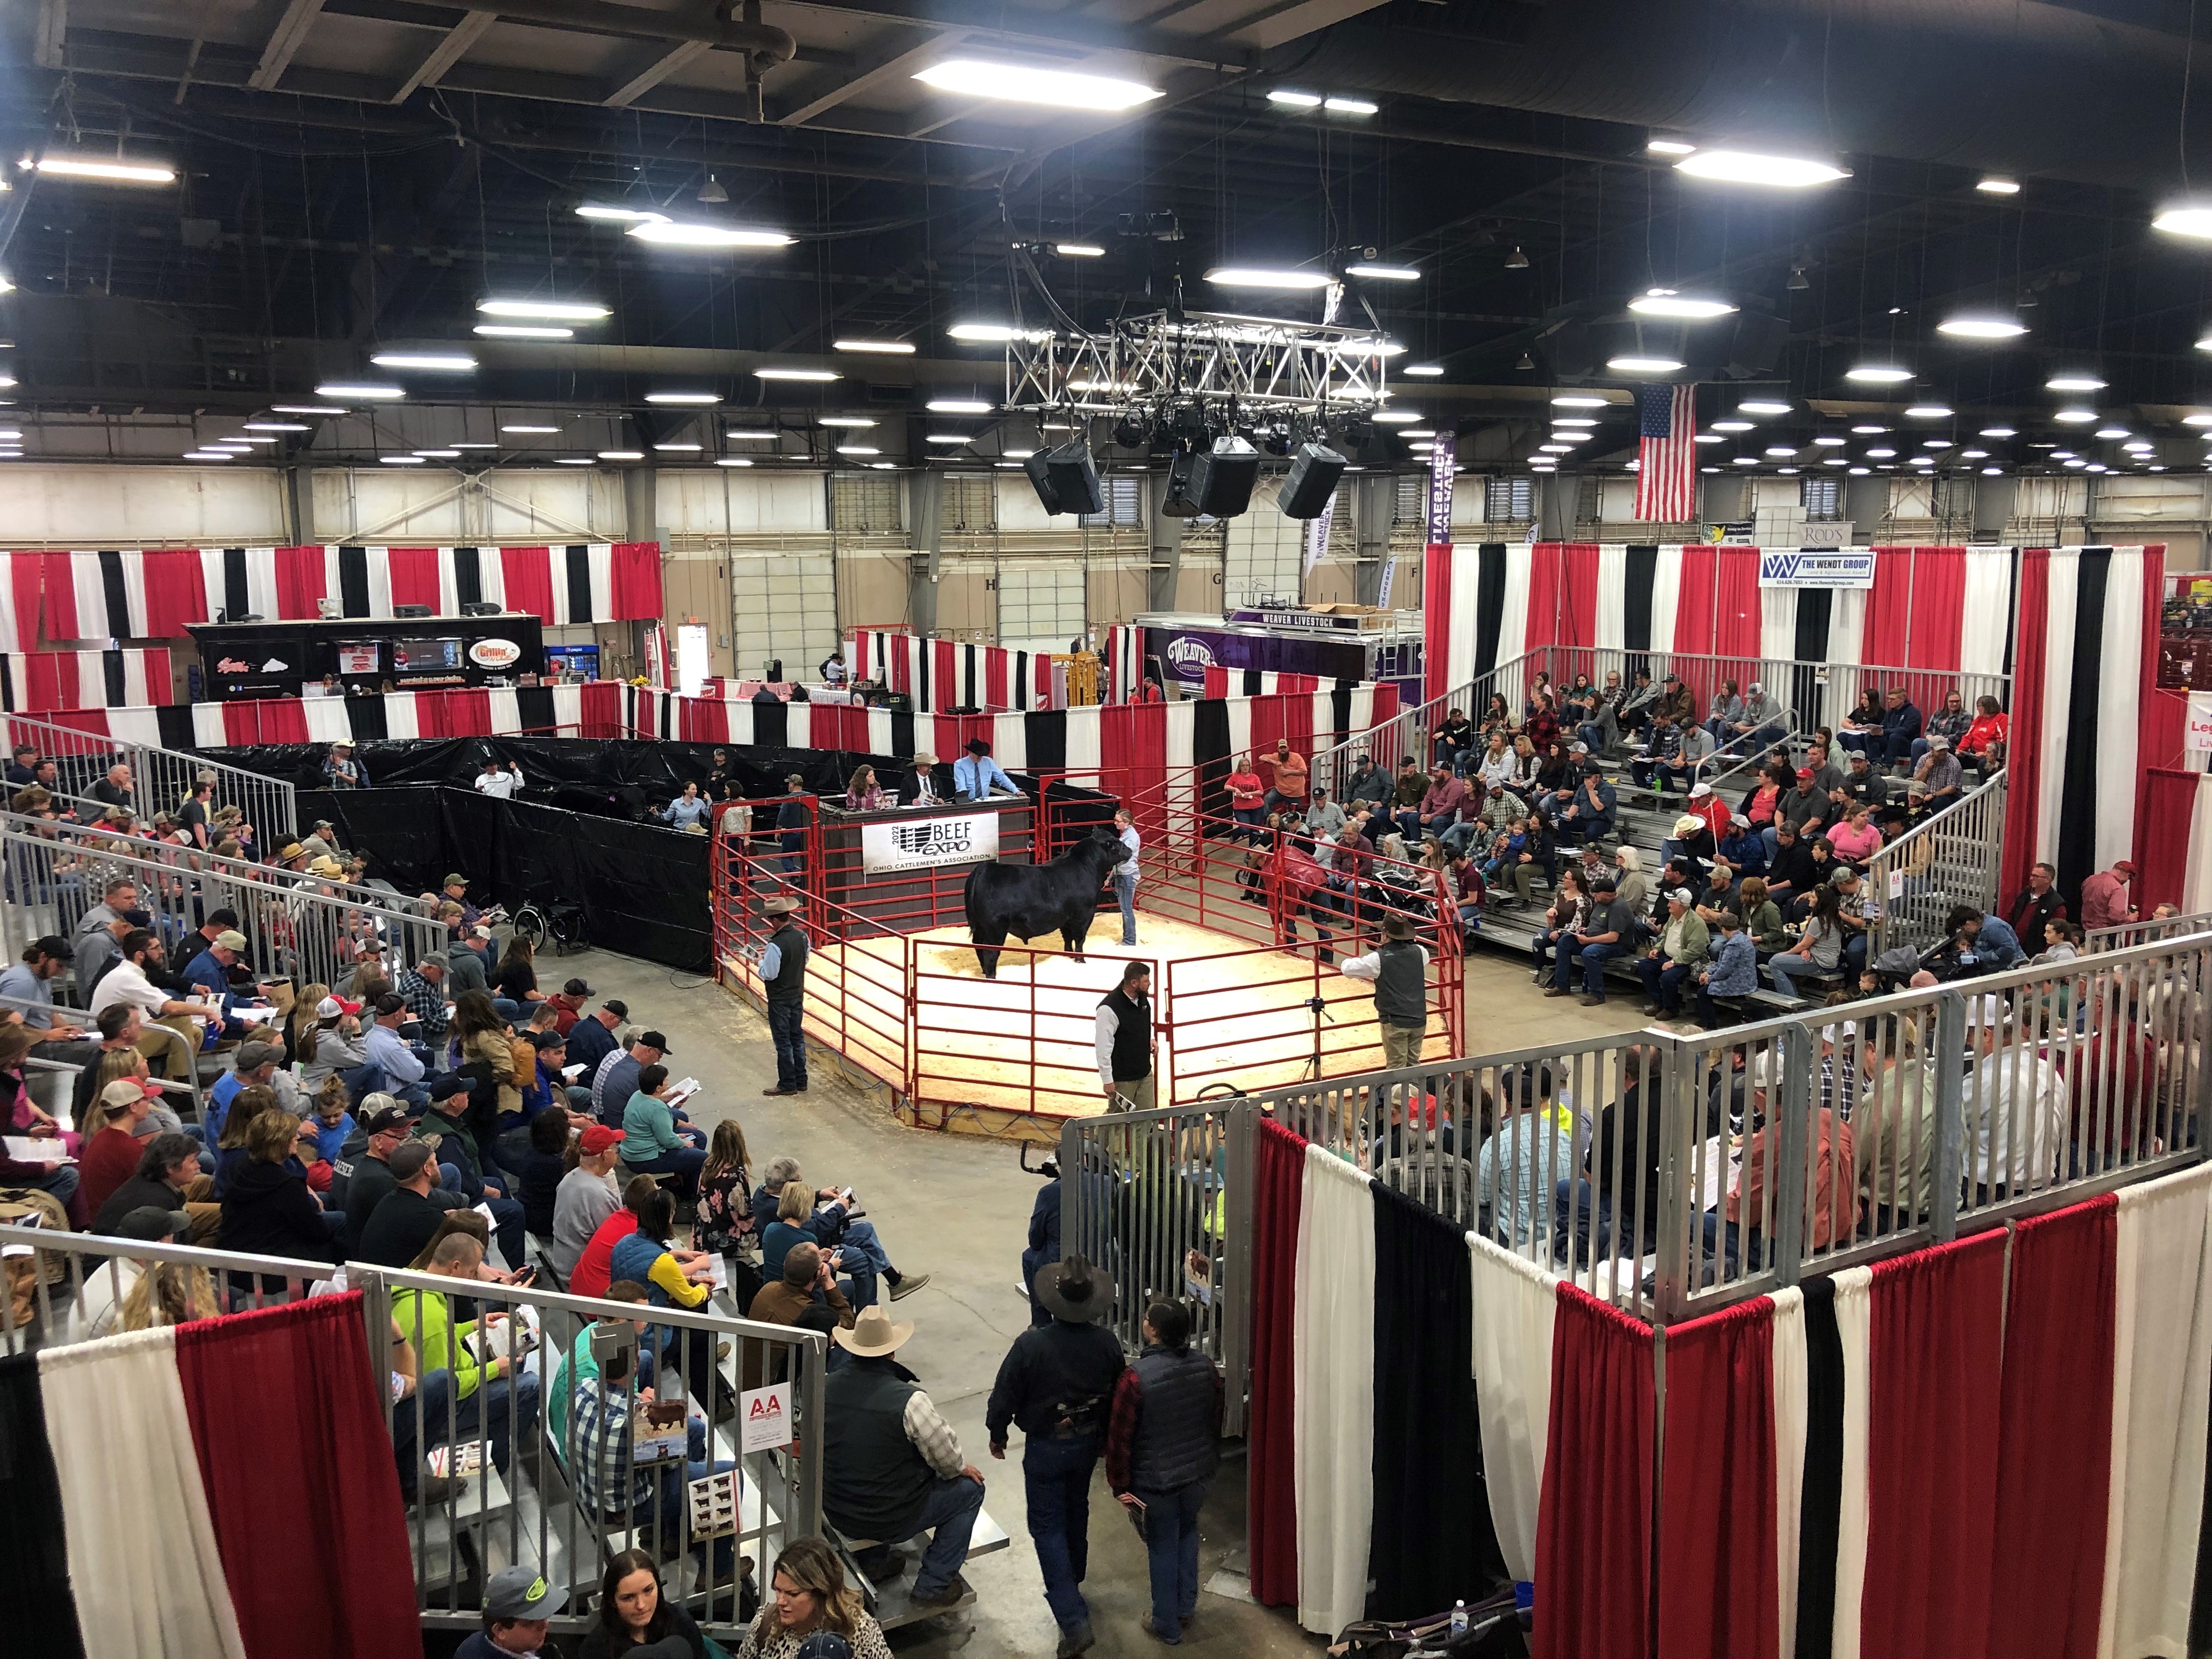 Beef enthusiasts gathered in Columbus for the 34th Ohio Beef Expo